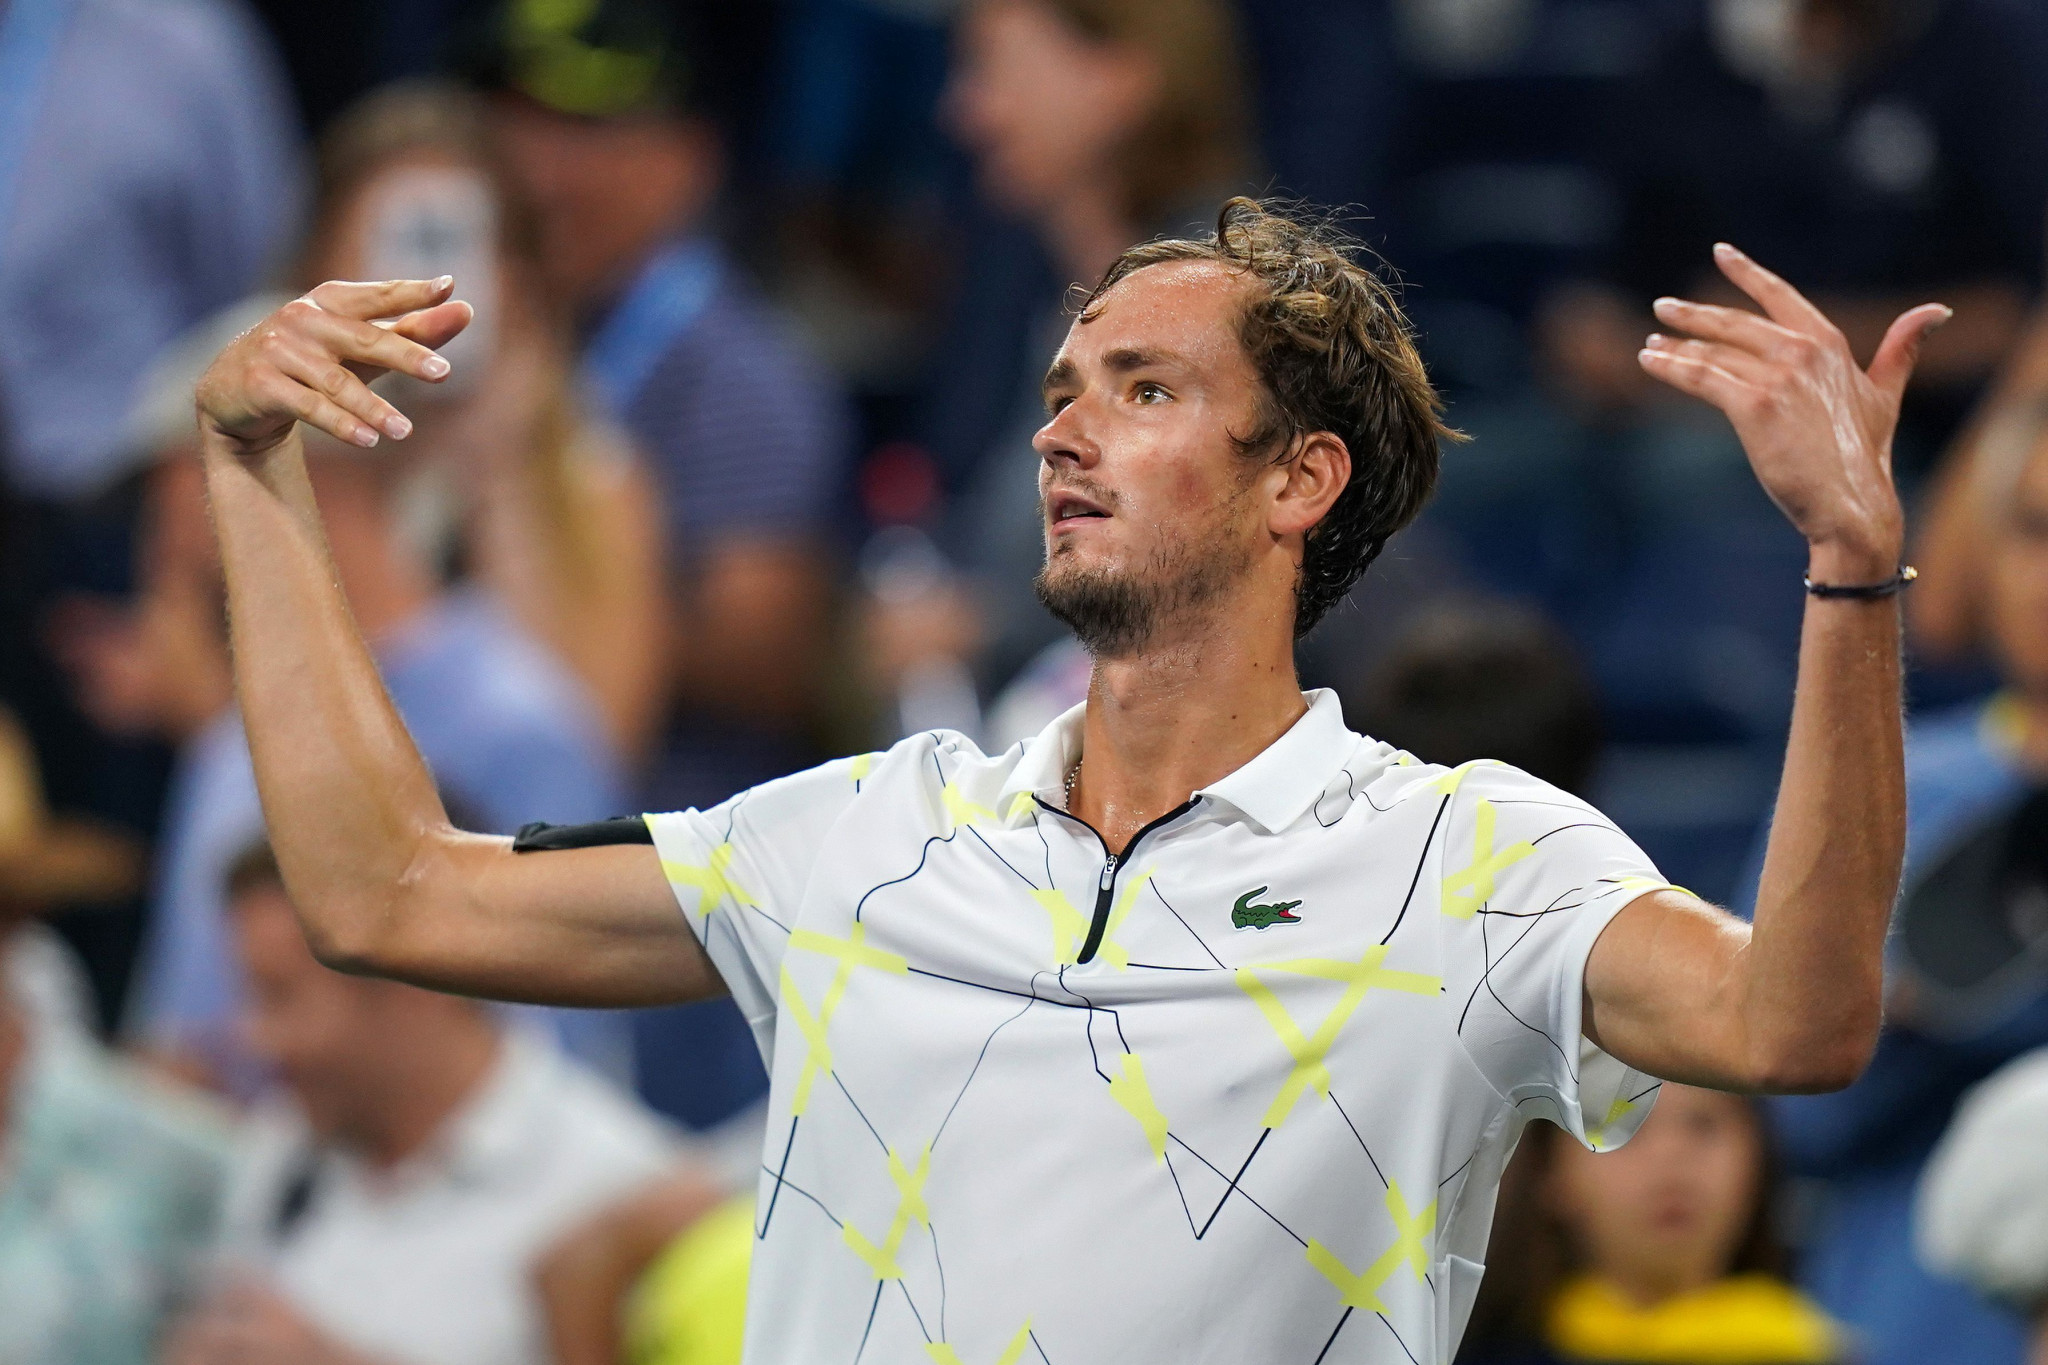 Daniil Medvedev played up to the jeering crowd again at Flushing Meadows ©Getty Images